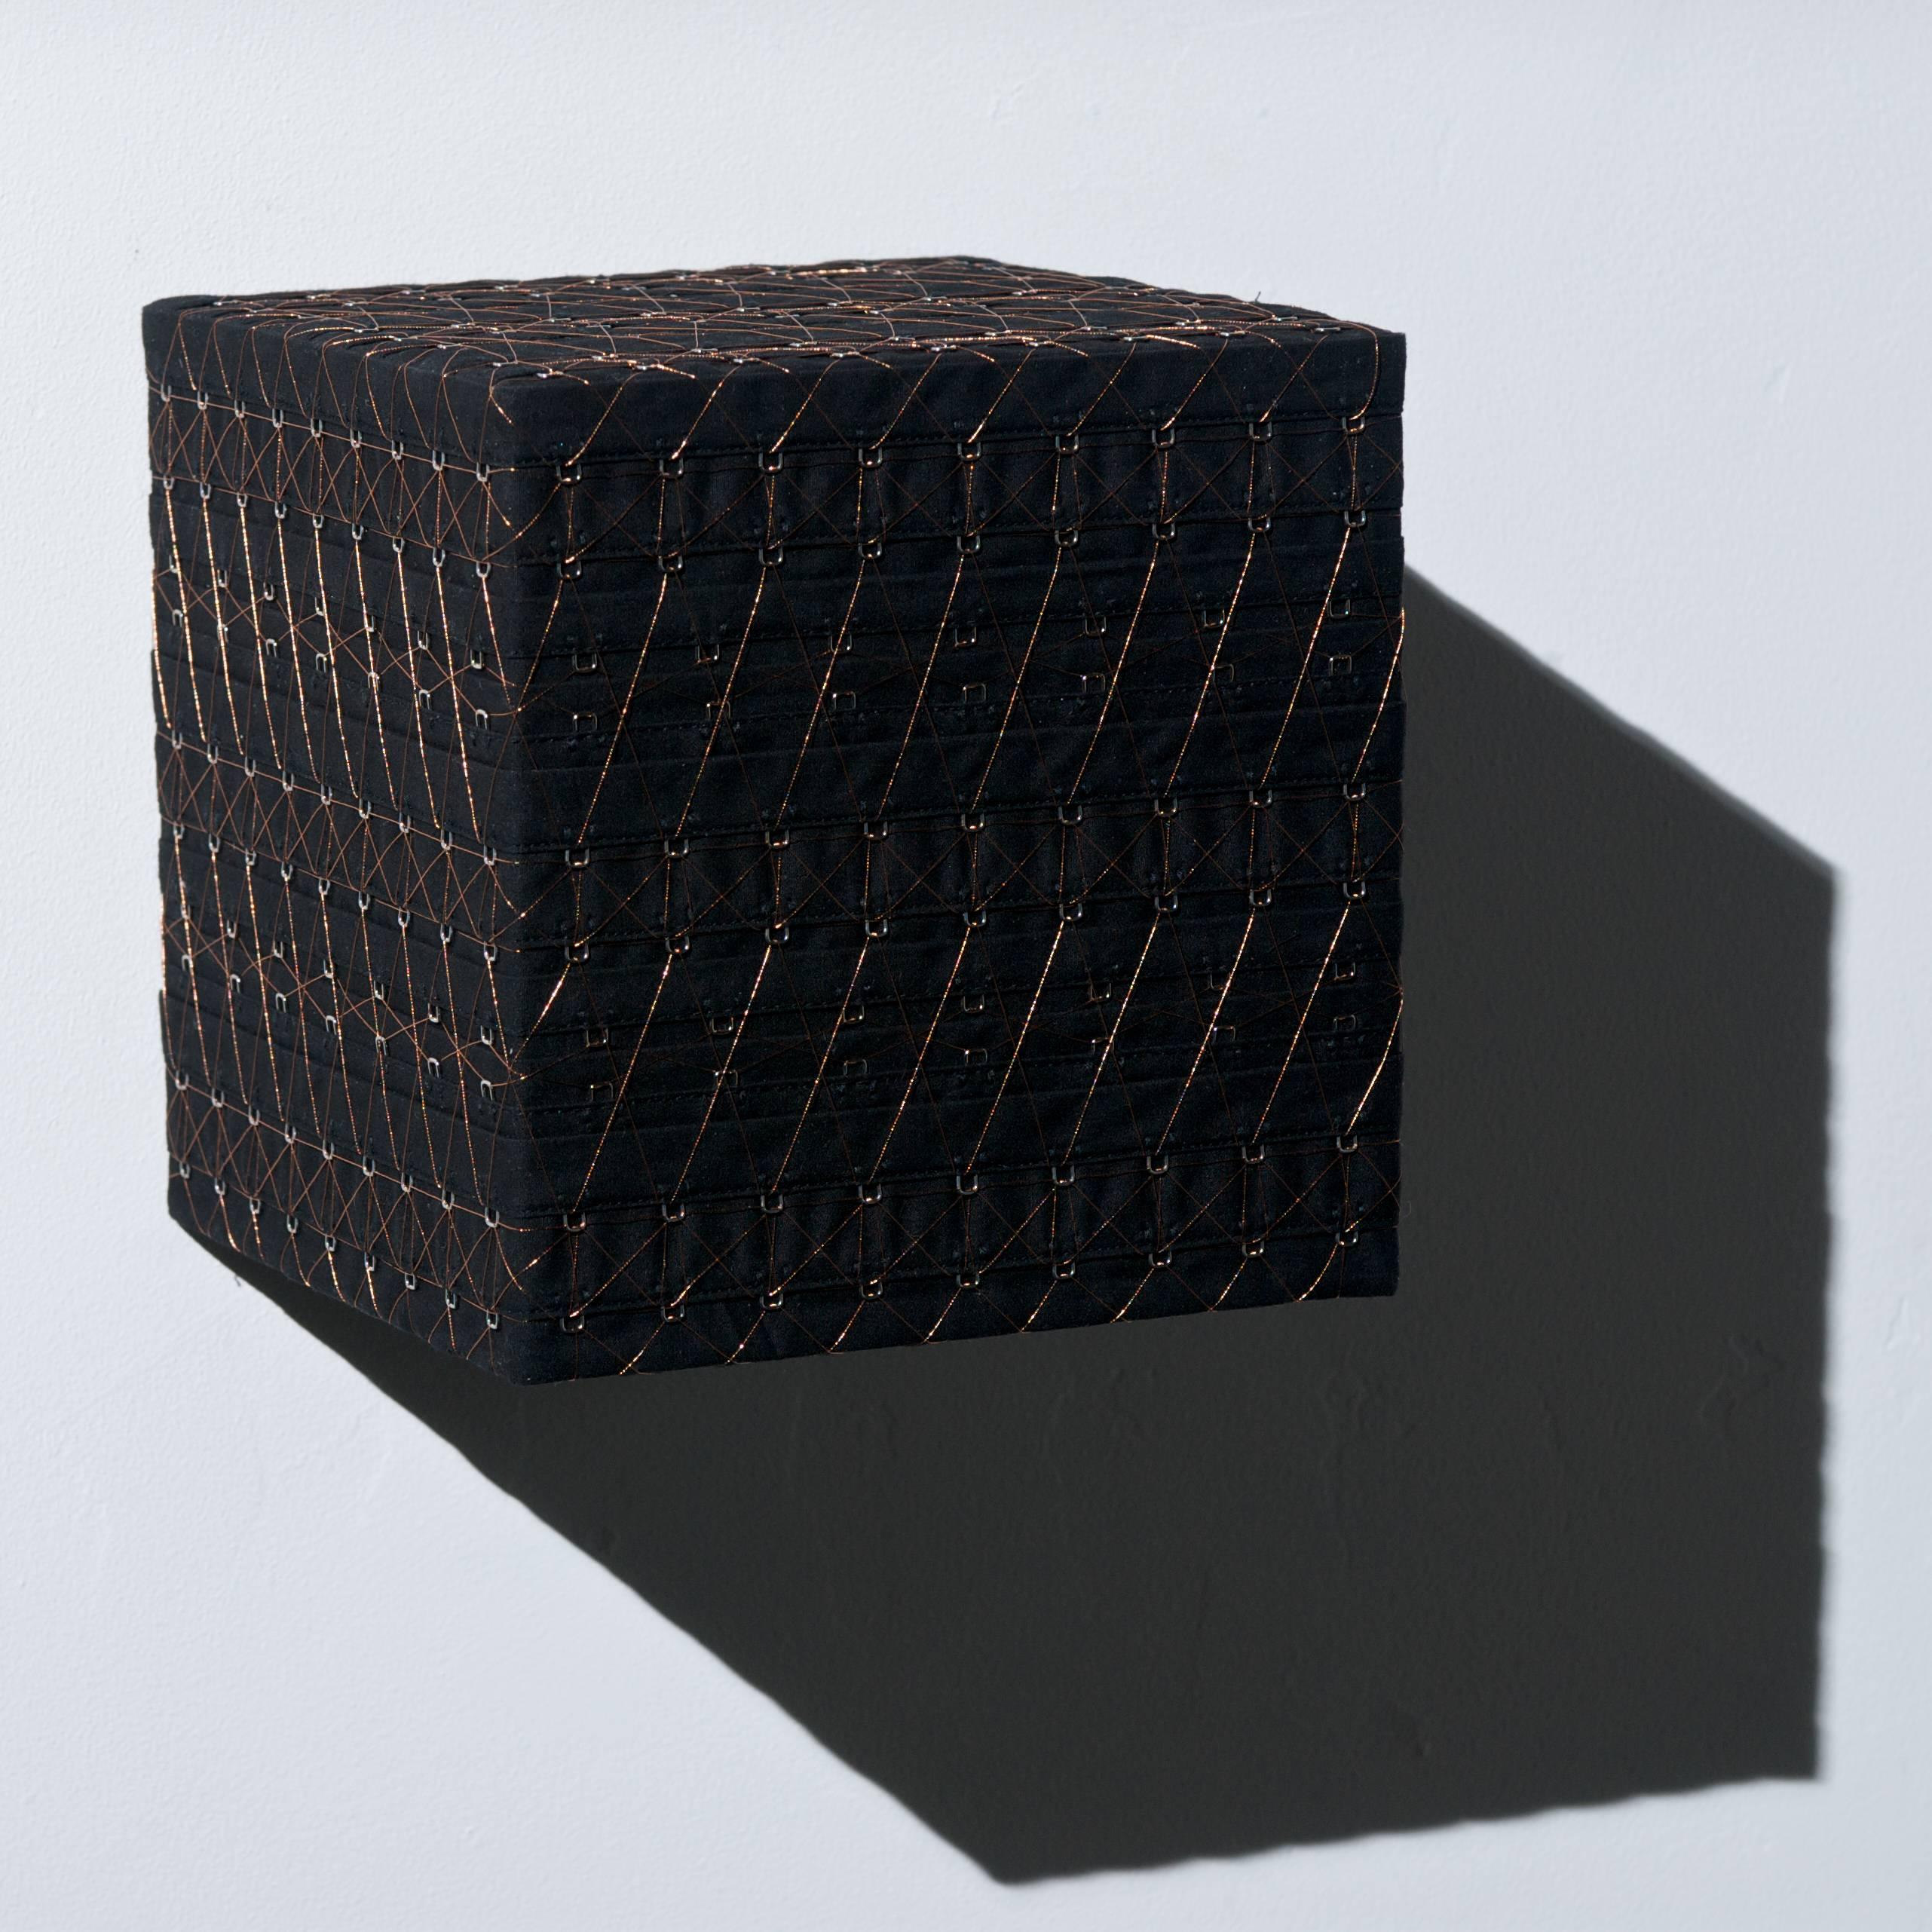 Denise Yaghmourian Abstract Sculpture - Black Cube w/ Copper #2